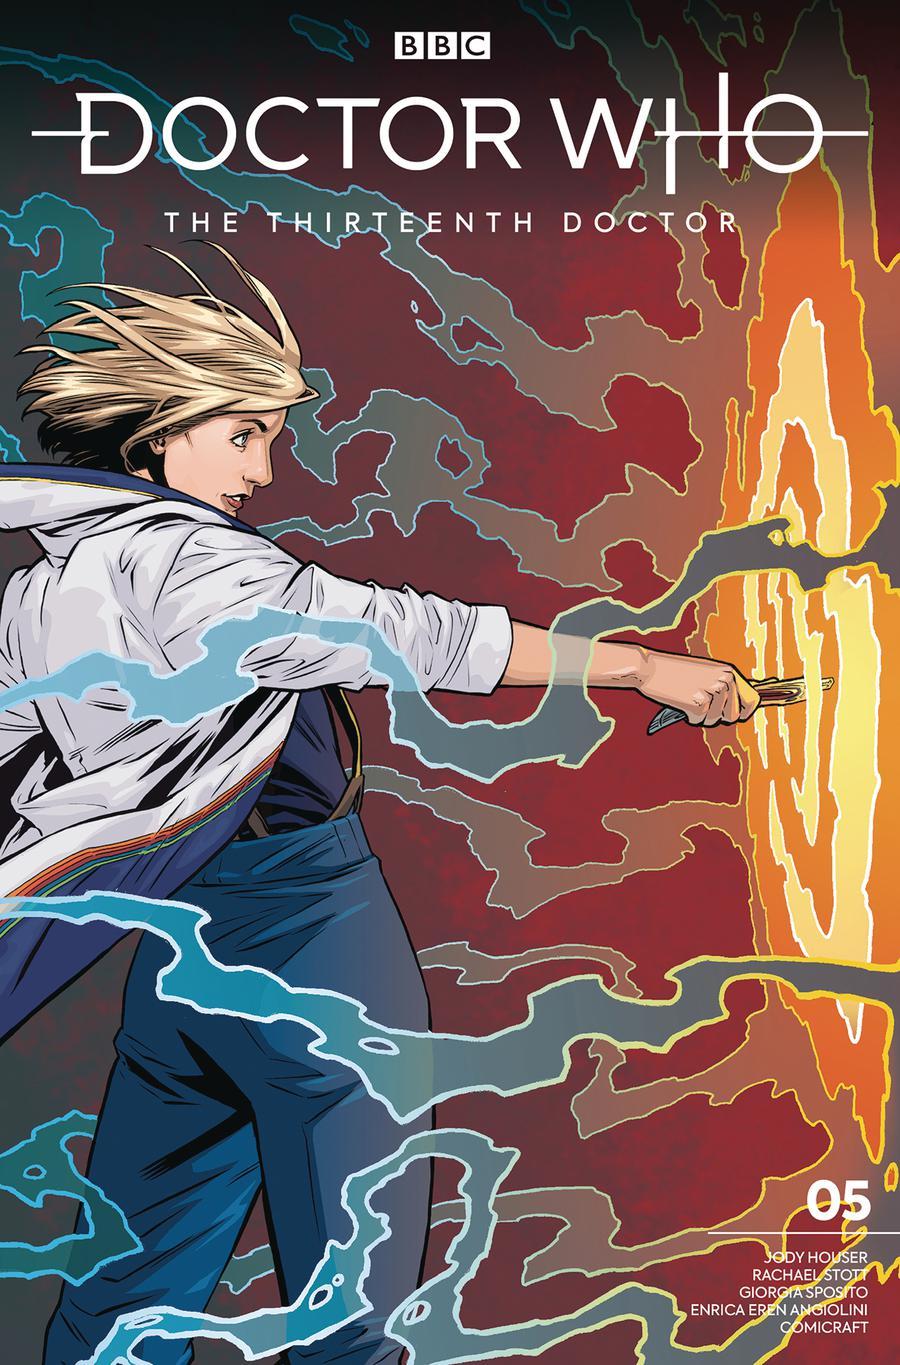 Doctor Who 13th Doctor Vol. 1 #5